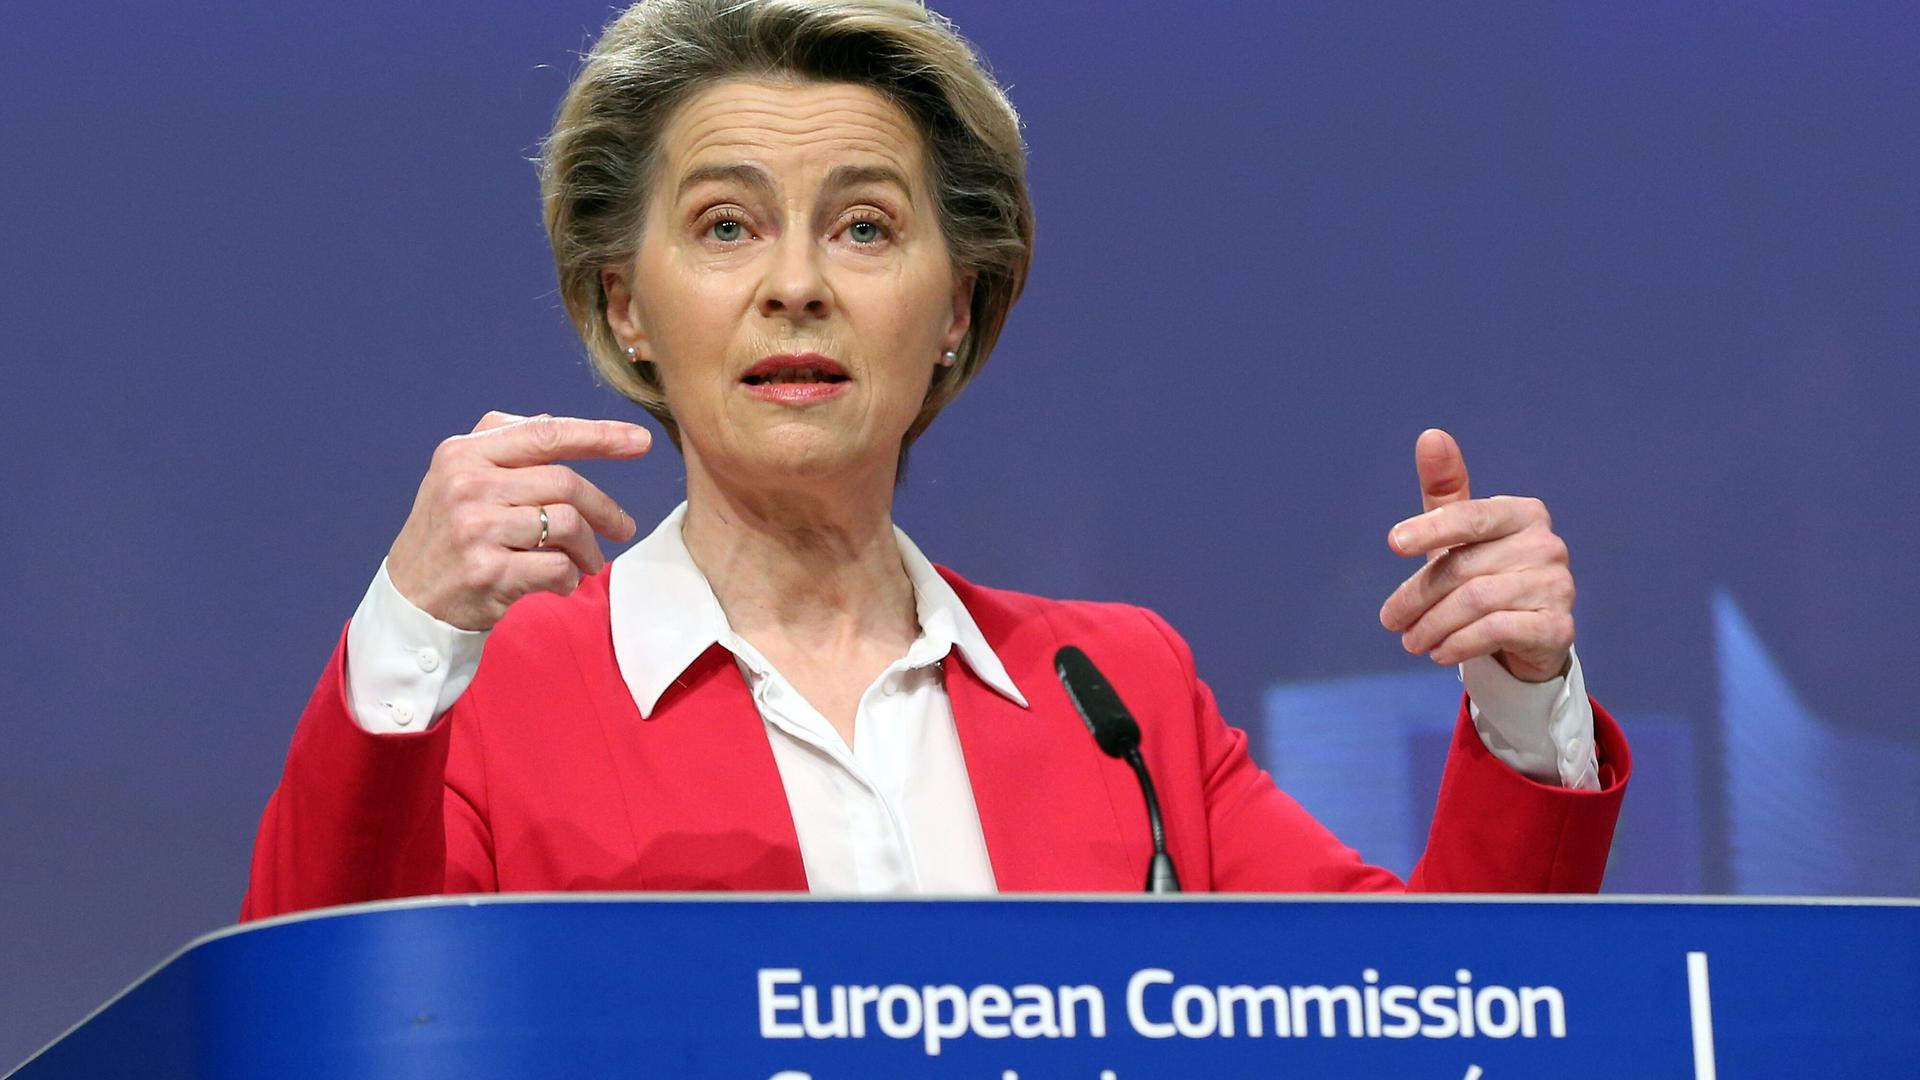 European Commission President Ursula von der Leyen at a press conference on the EU's vaccine strategy on 8 January Photo: Francois Walschaerts/AFP